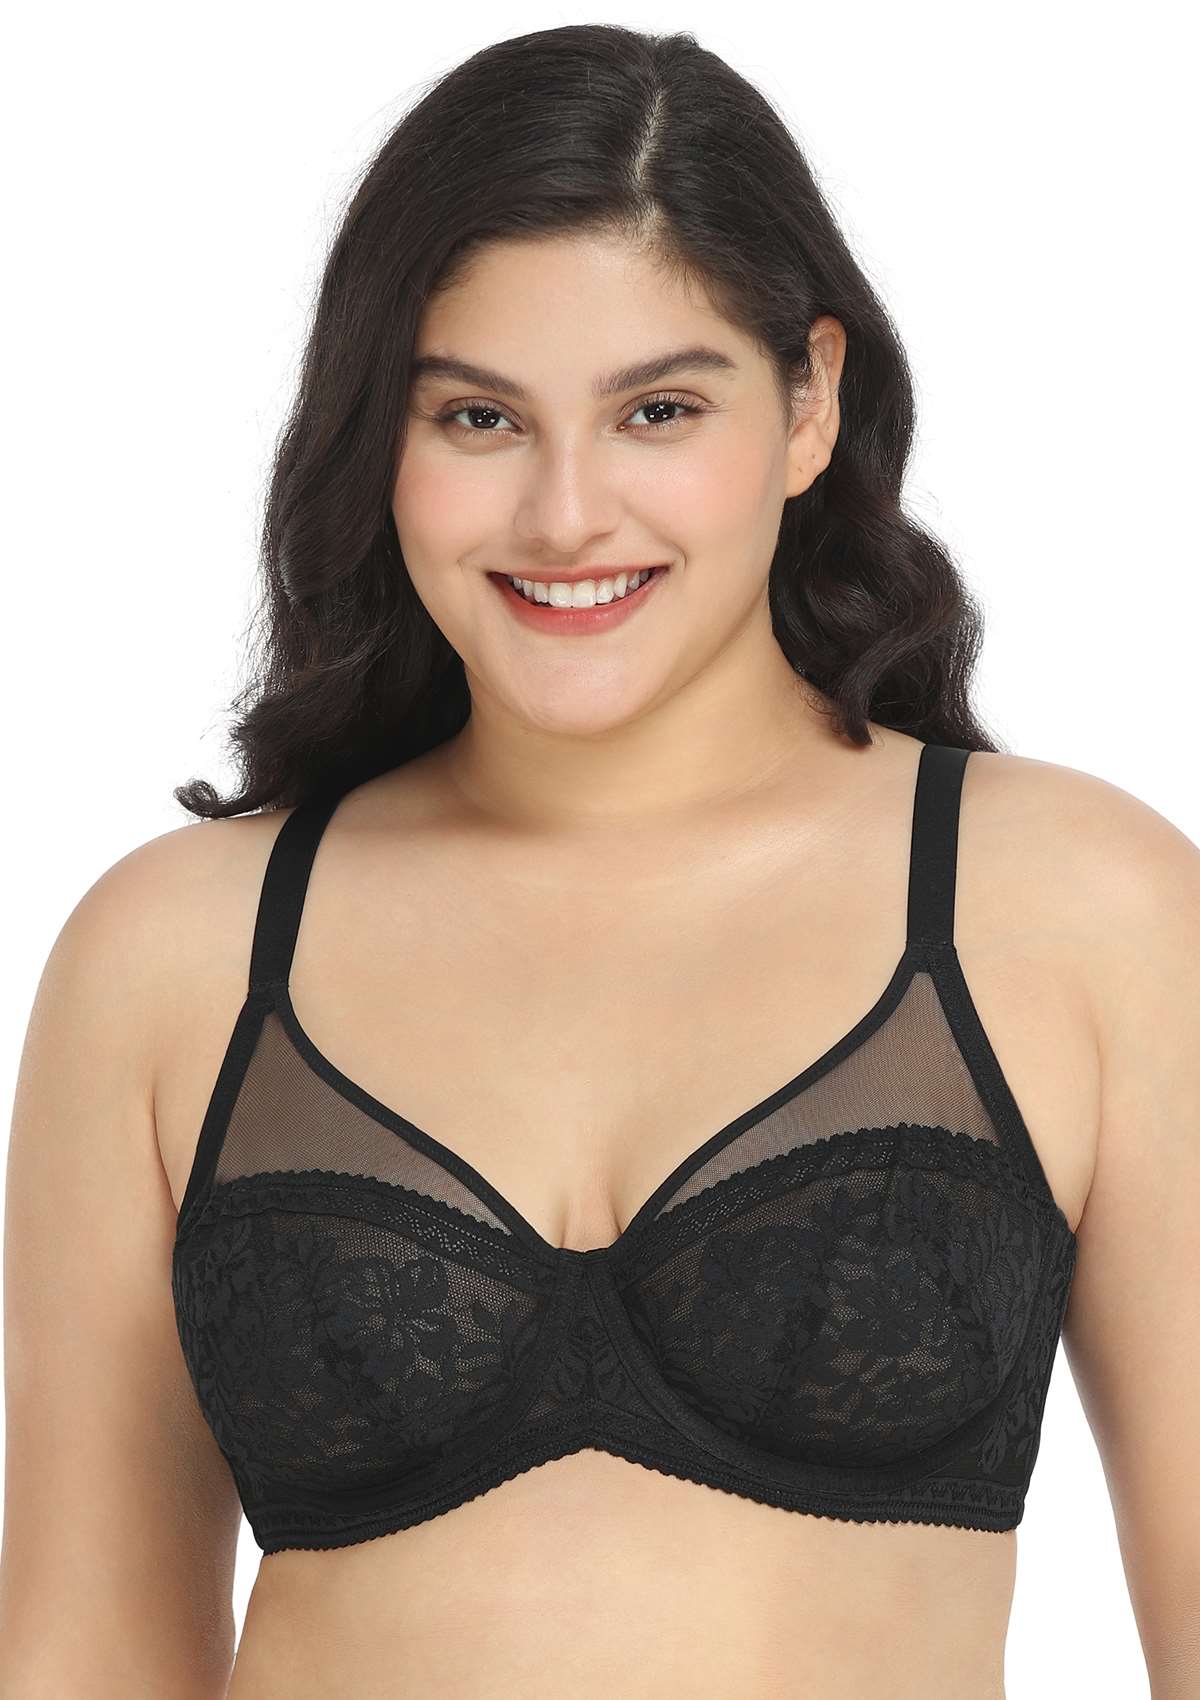 HSIA Gladioli Lace Mesh Minimizing Unlined Underwire Bra For Fuller Busts - Black / 42 / H